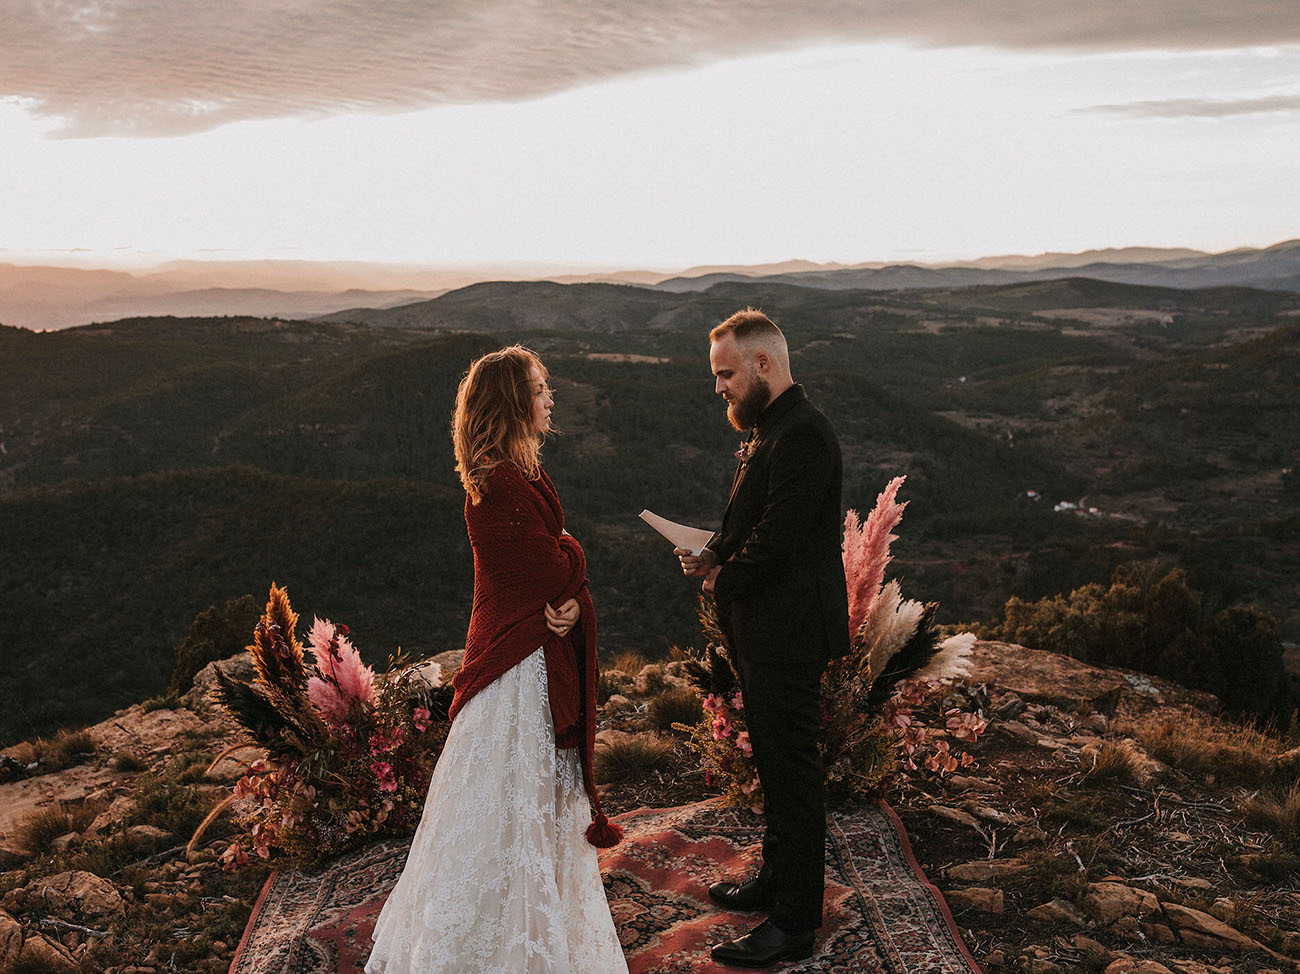 A nature lover’s dream elopement in the Spanish mountains